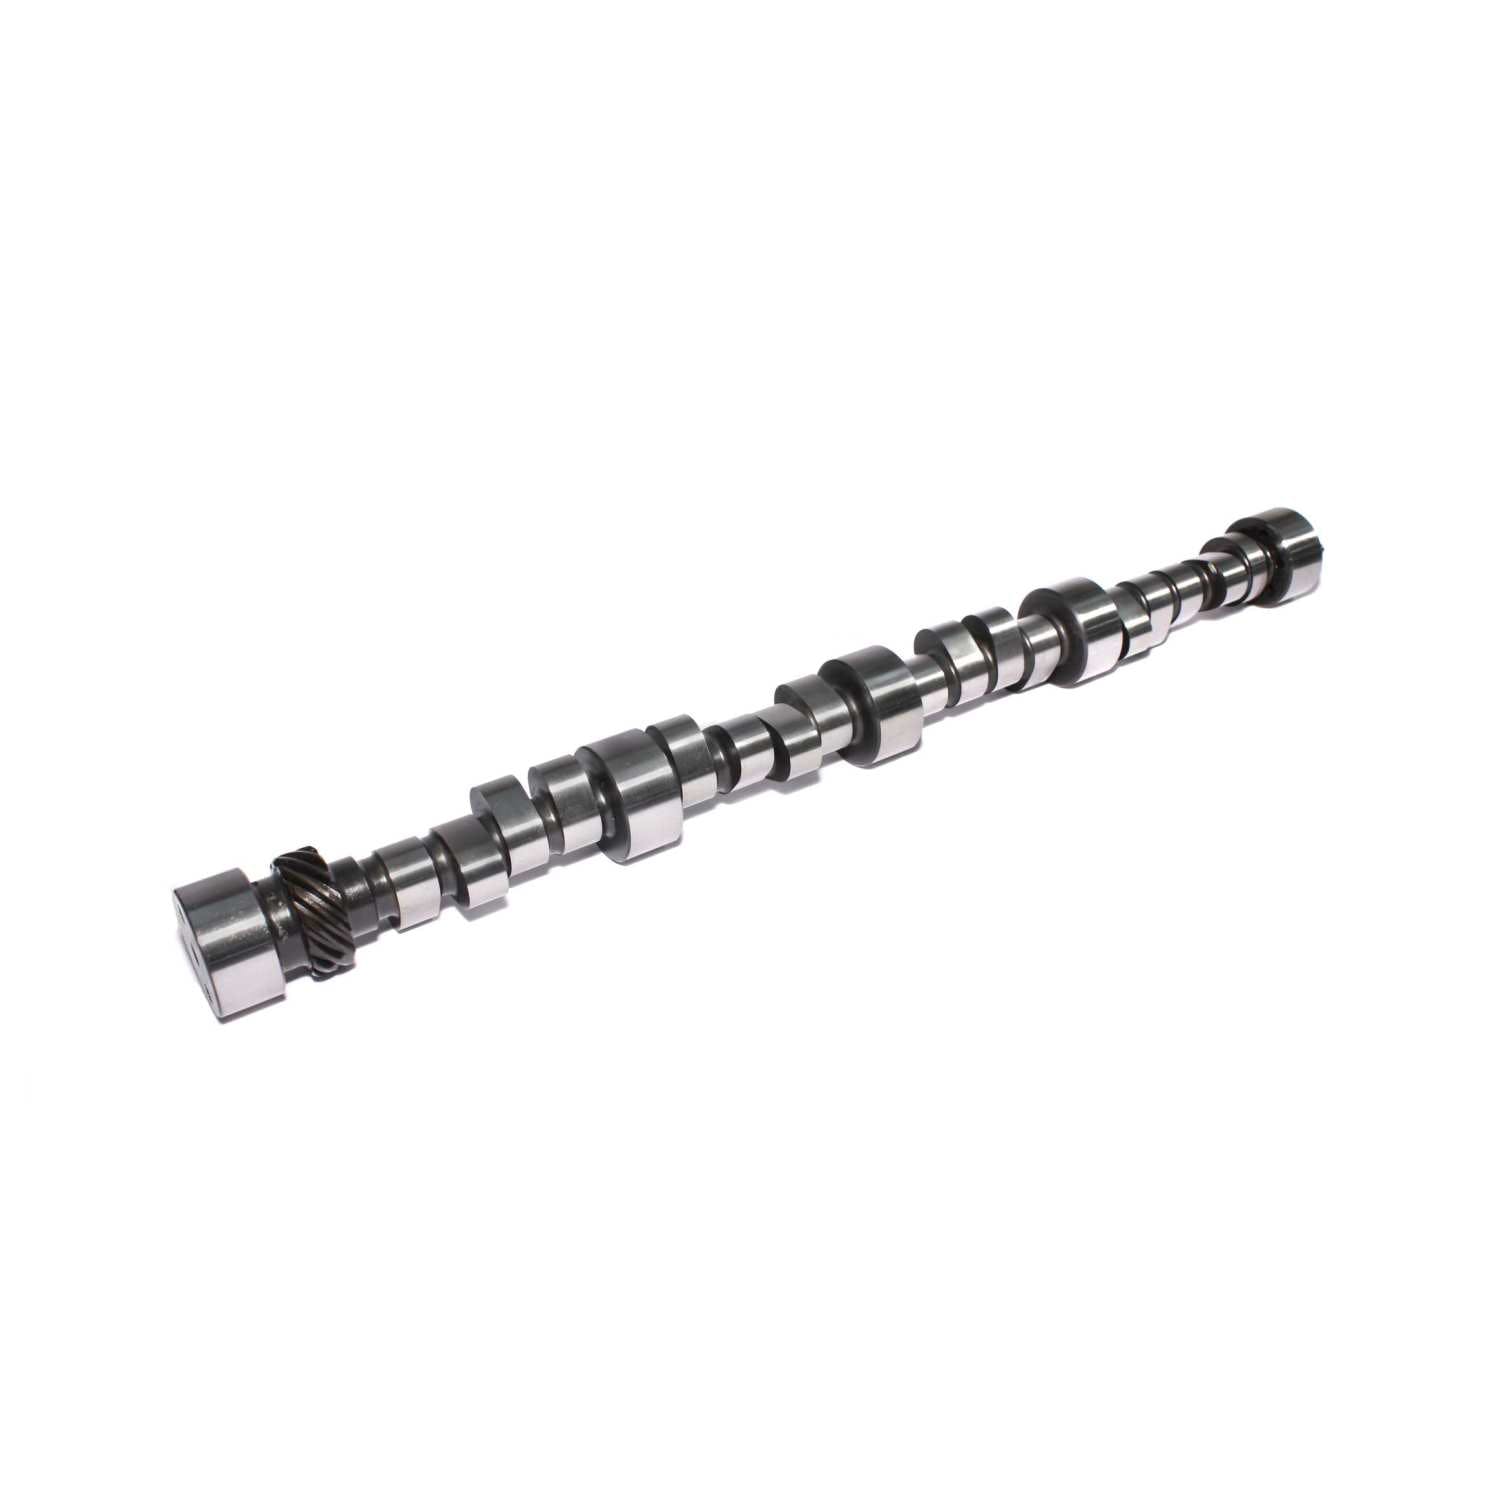 Competition Cams 11-721-9 Drag Race Camshaft